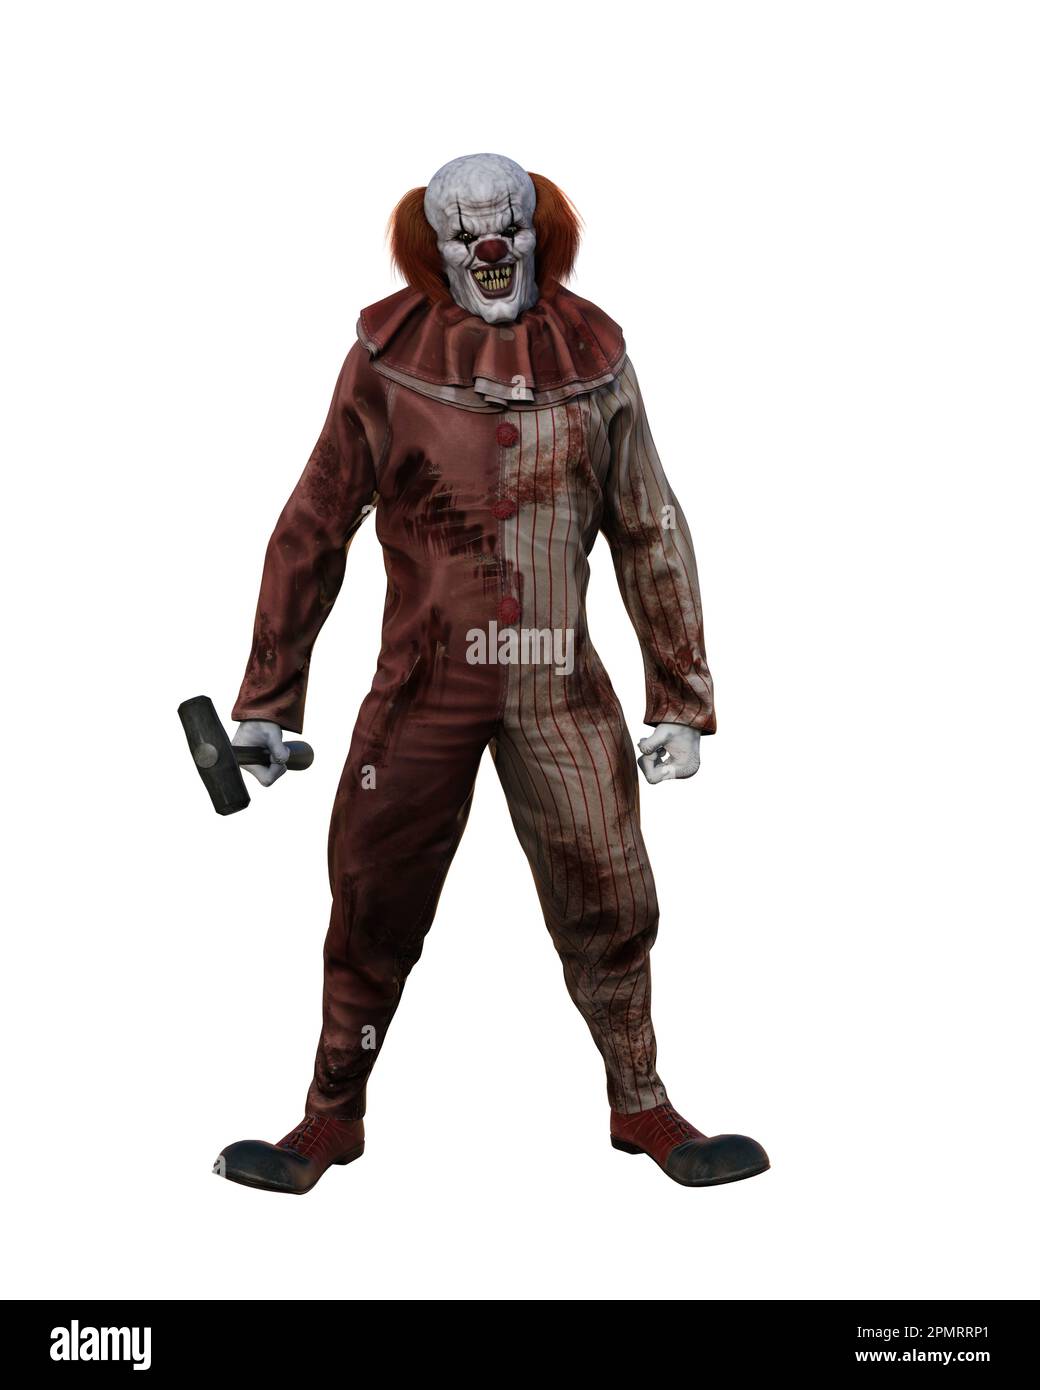 Evil clown standing in blood stained costume looking at camera with a large hammer in his right hand. 3D illustration isolated on white background. Stock Photo